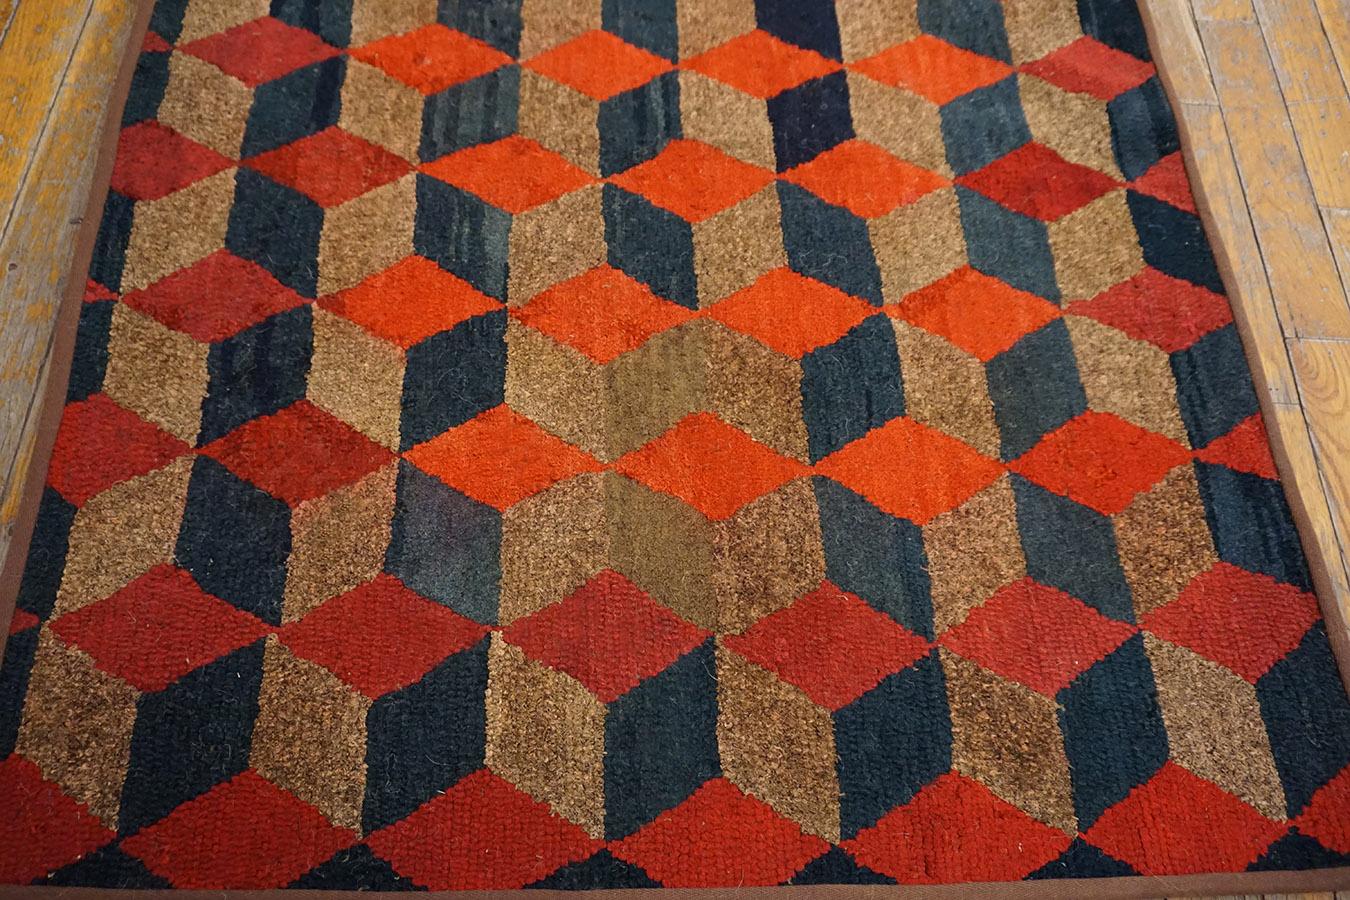 Early 20th Century American Hooked Rug ( 2'10